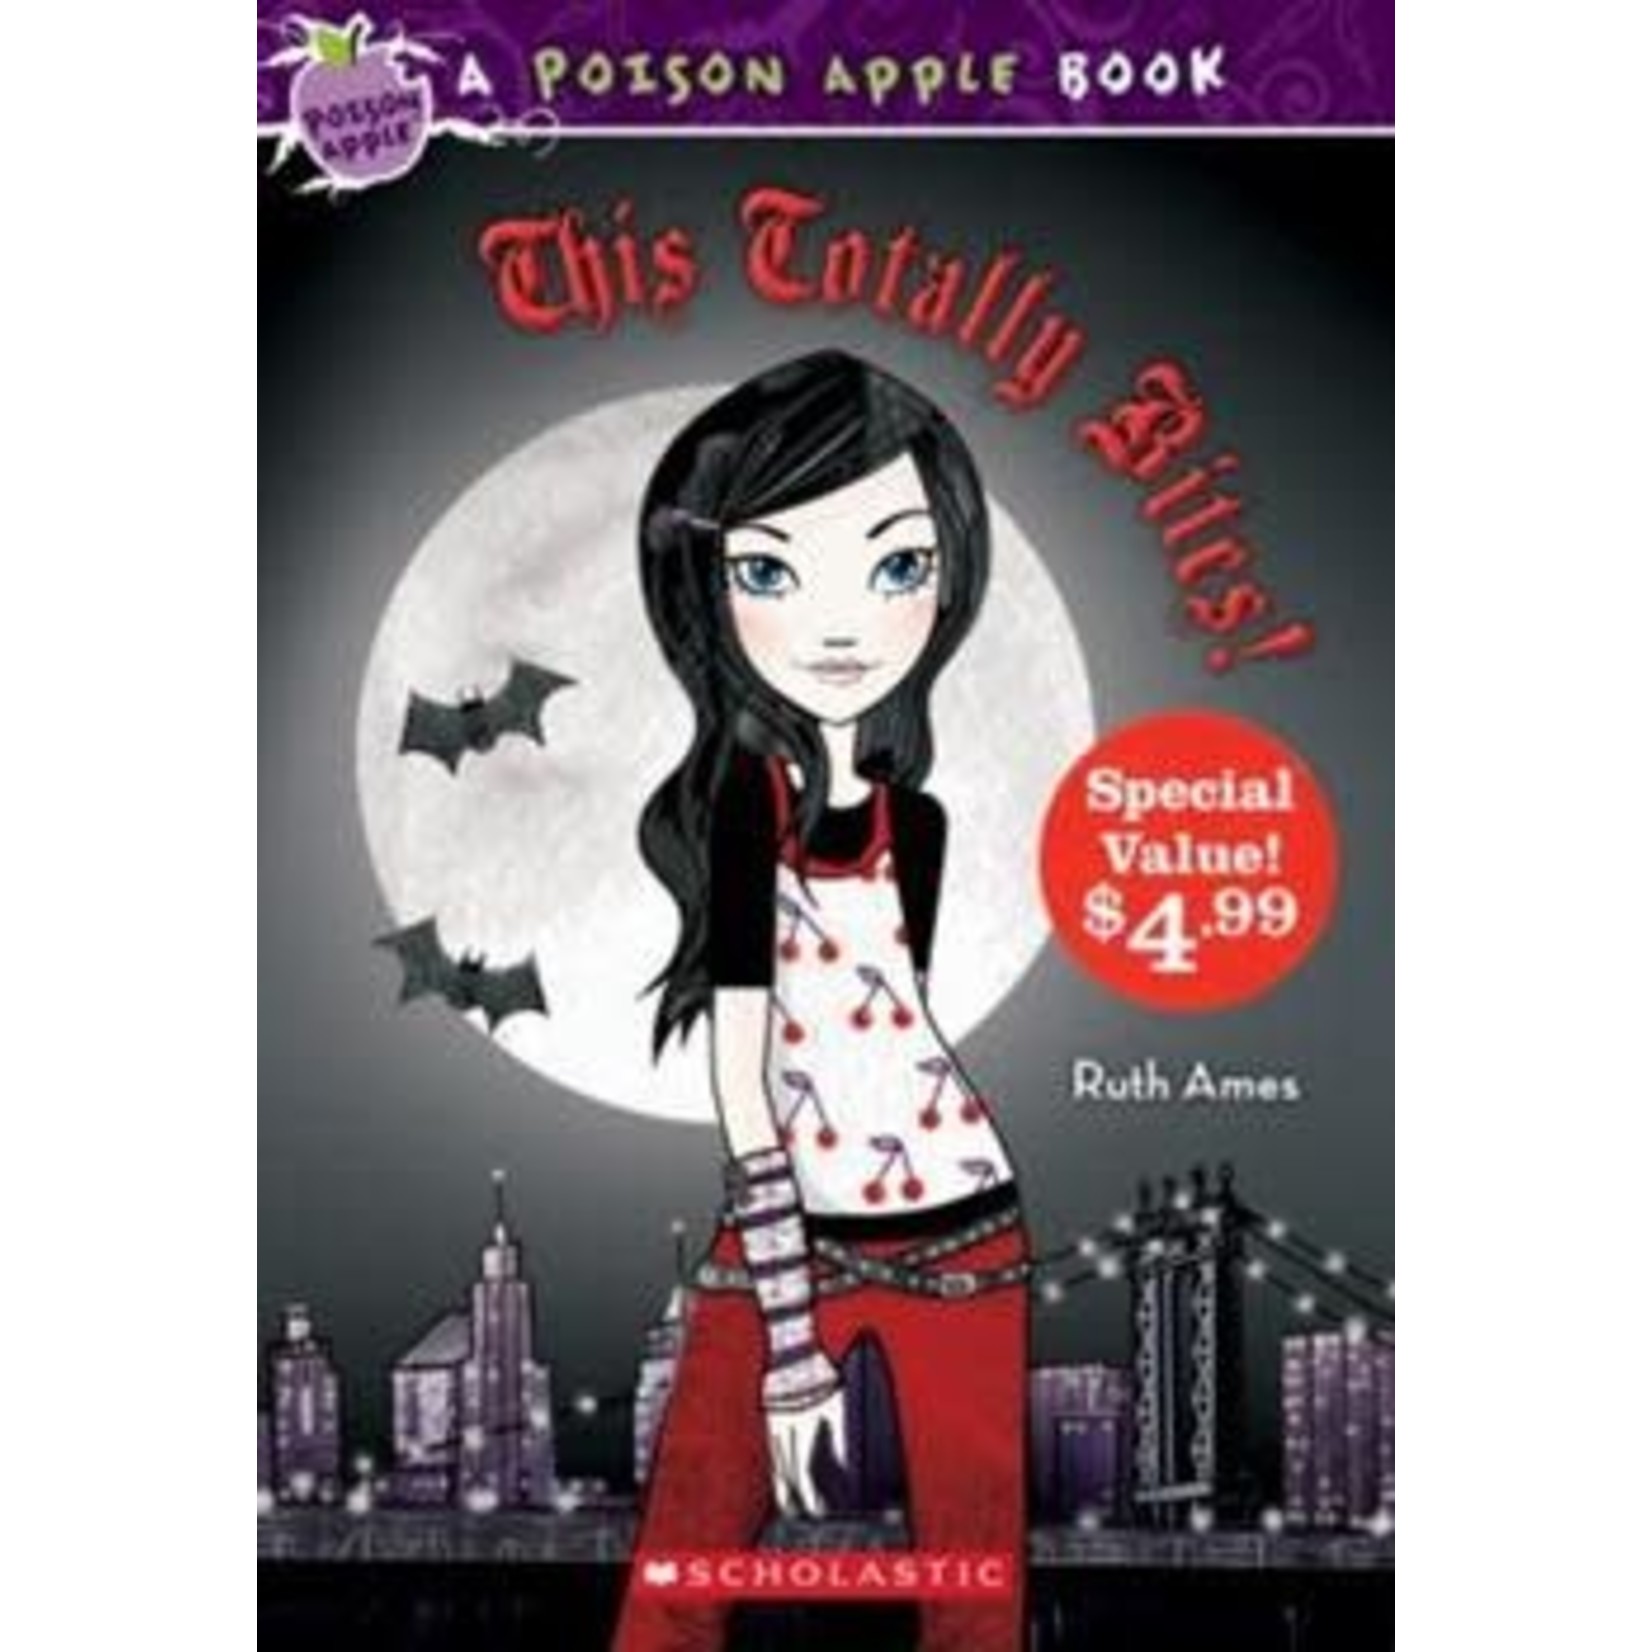 Ruth Ames Poison Apple Series Book 2 This Totally Bites